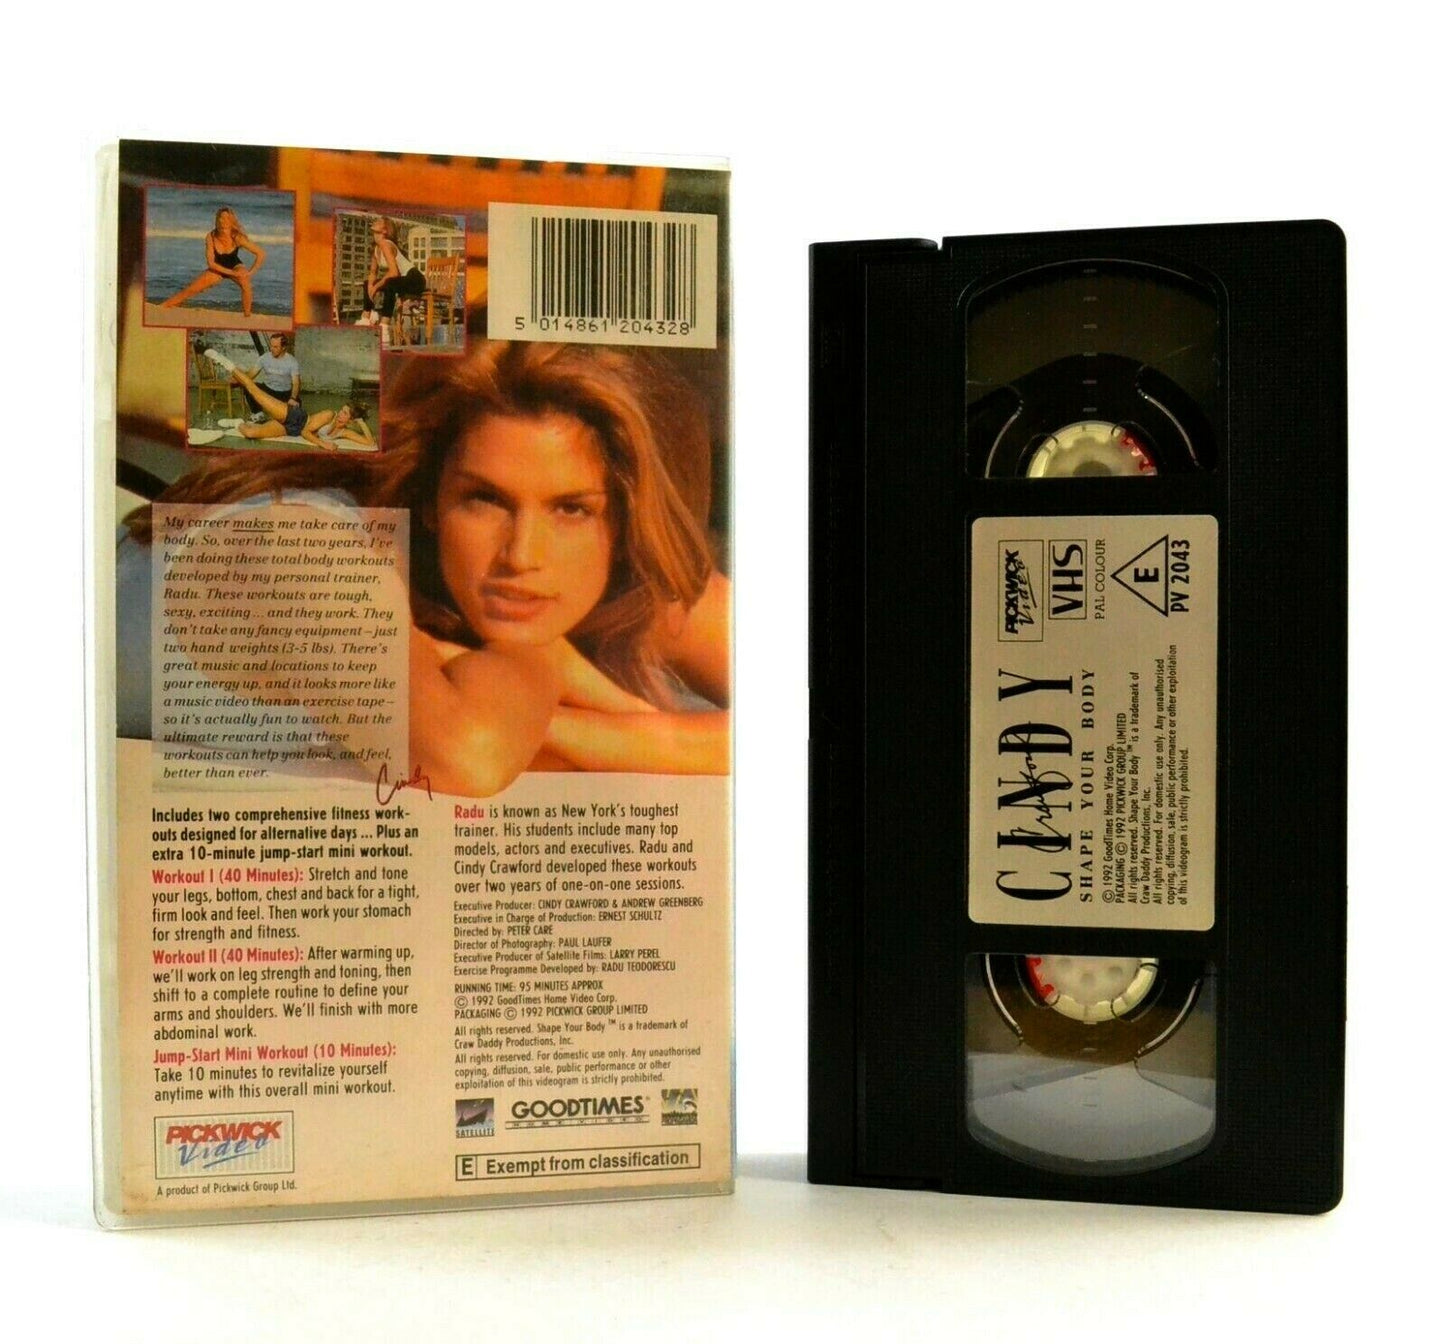 Cindy Crawford: Shape Your Body - Workout - Fitness - Exercises - Beauty - VHS-